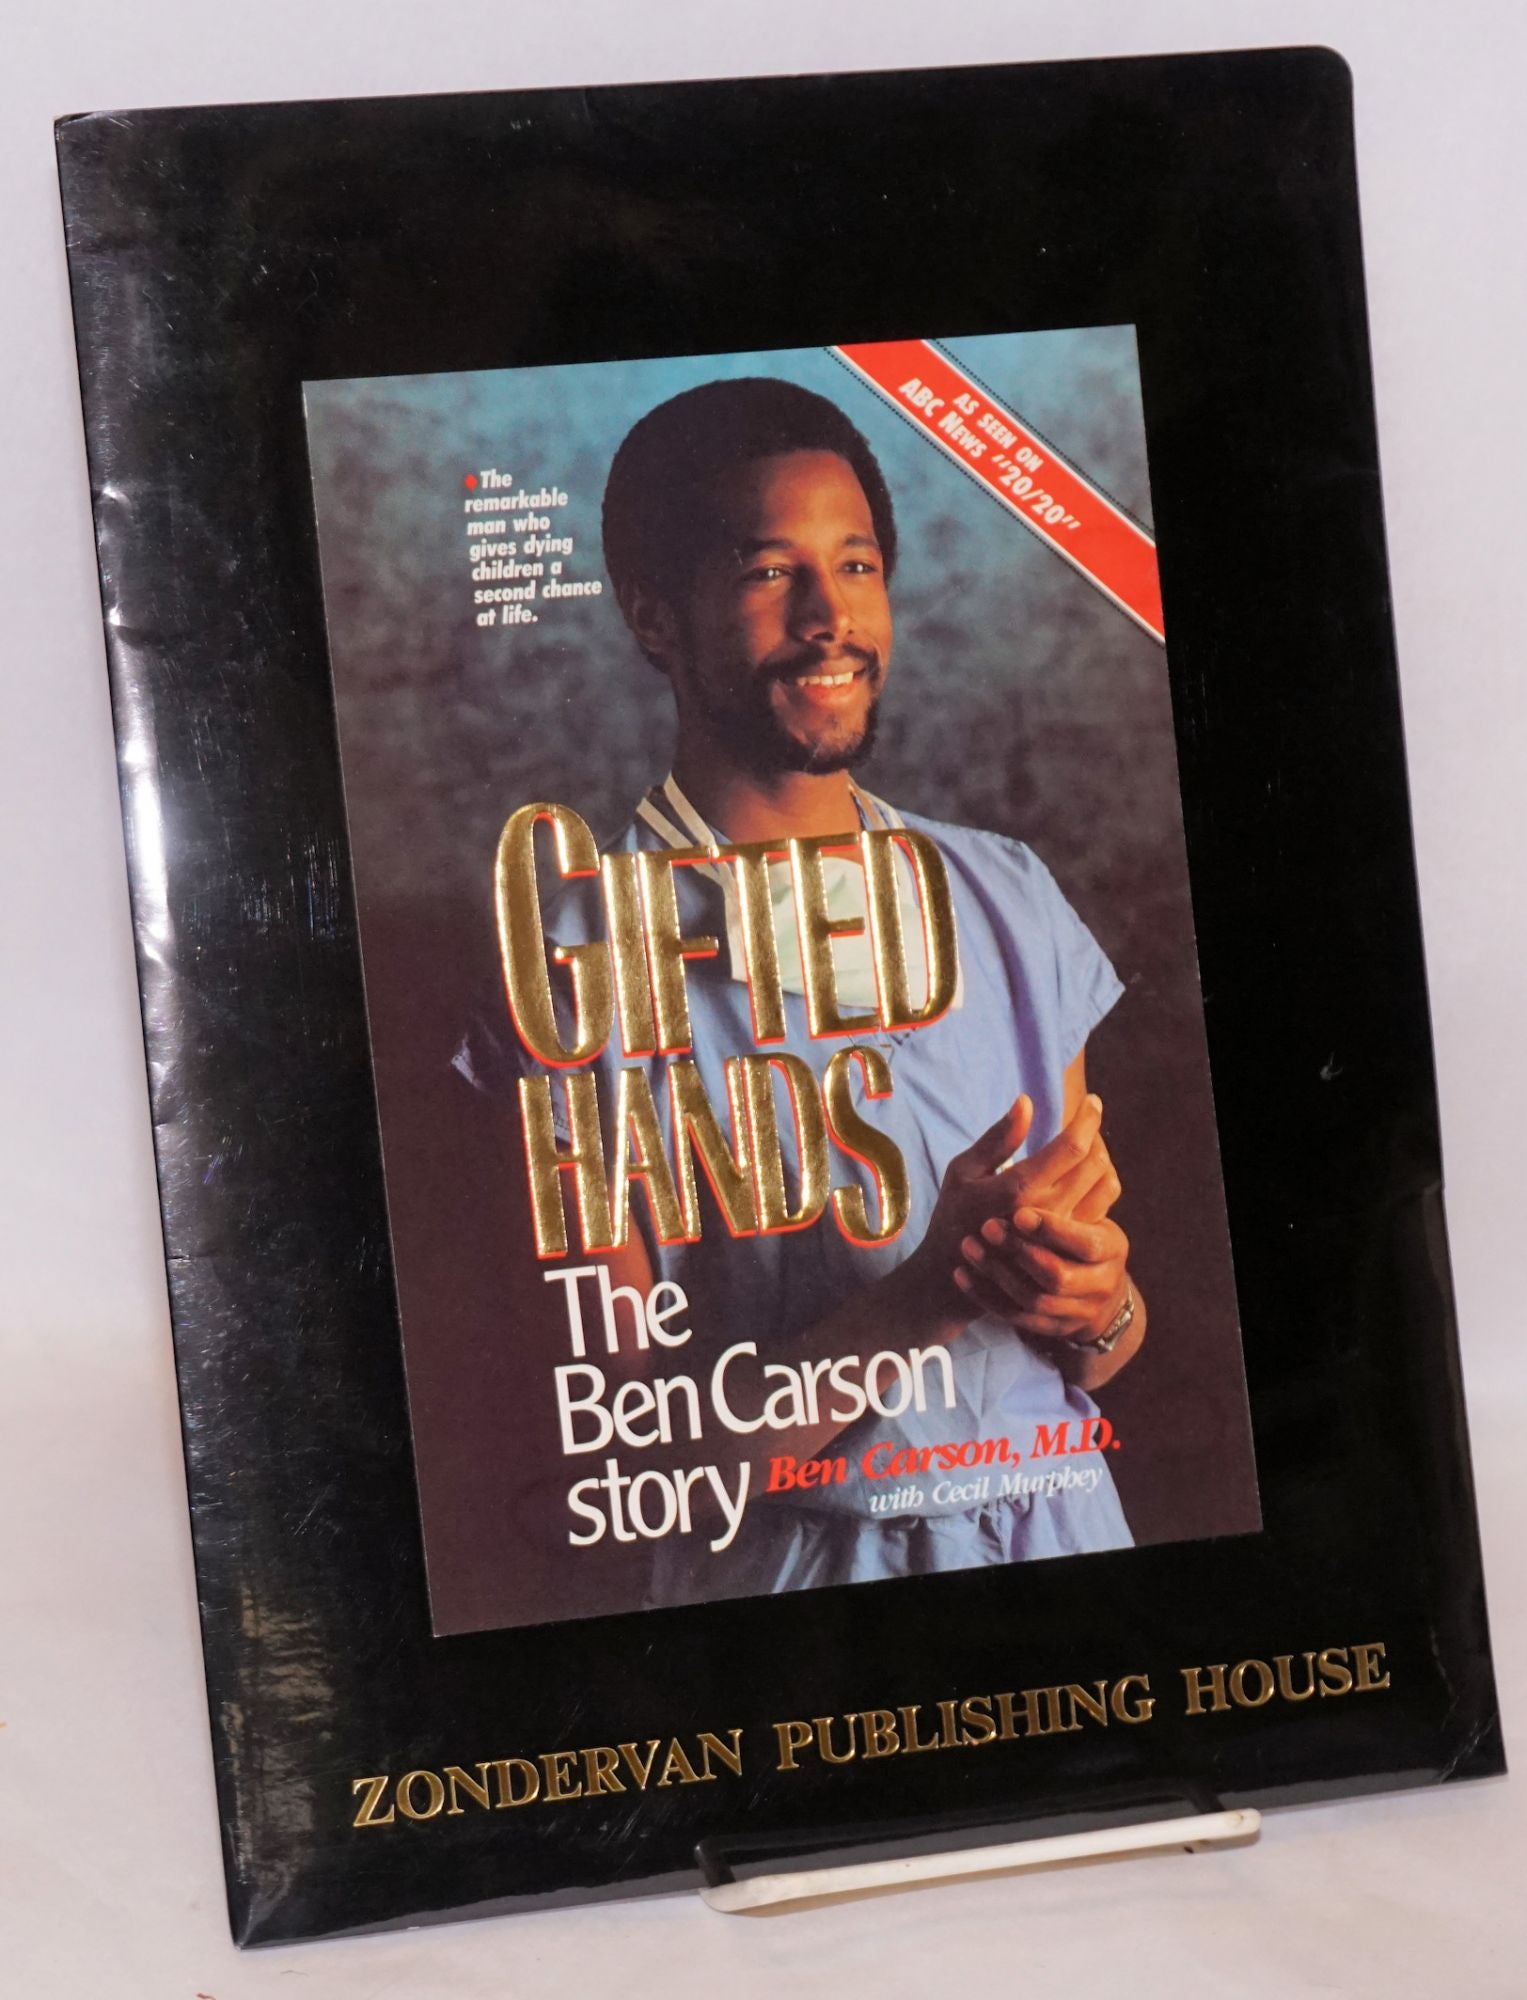 Gifted Hands: The Ben Carson Story : Lewis, Gregg, Lewis, Deborah Shaw:  Amazon.in: Books